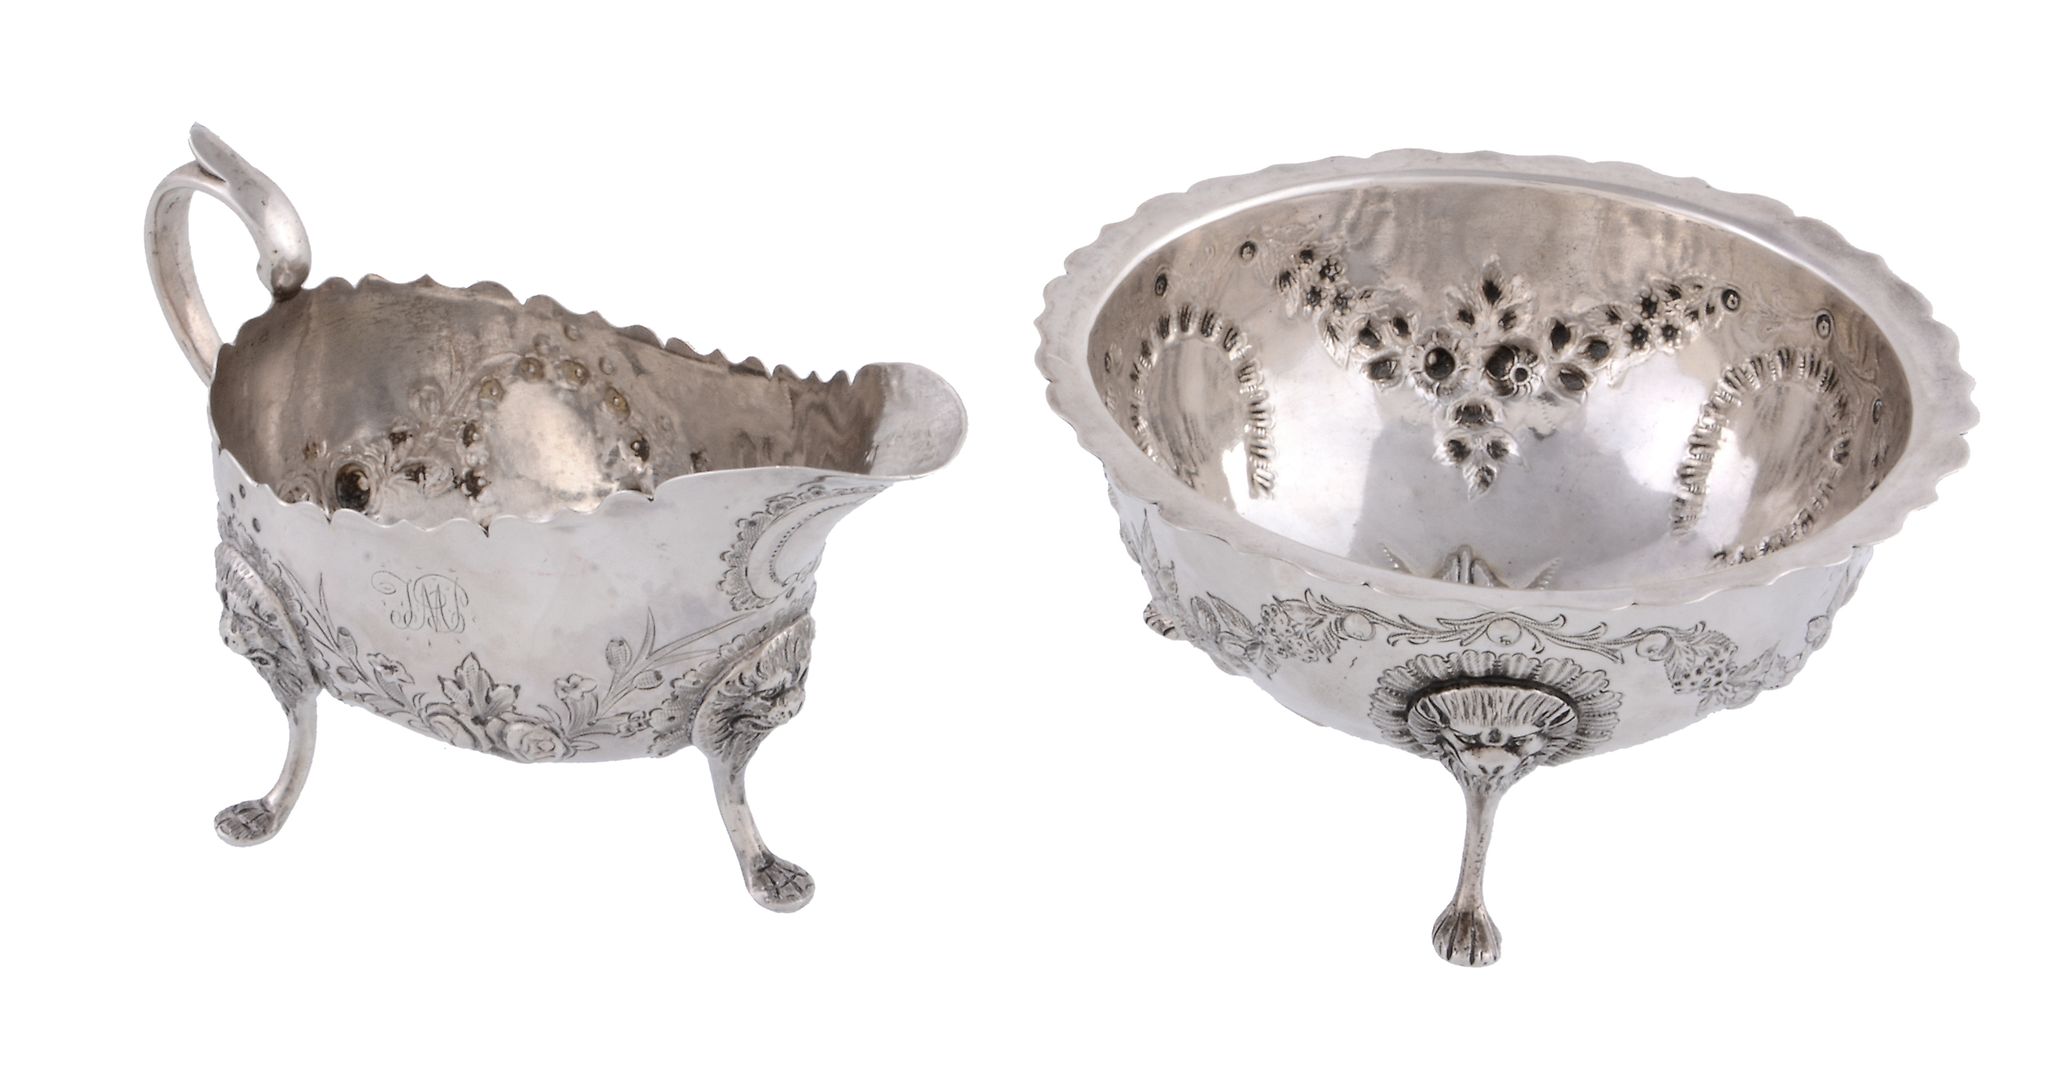 A Victorian Irish silver cream jug and sugar bowl by John Smith, Dublin 1879, embossed with floral